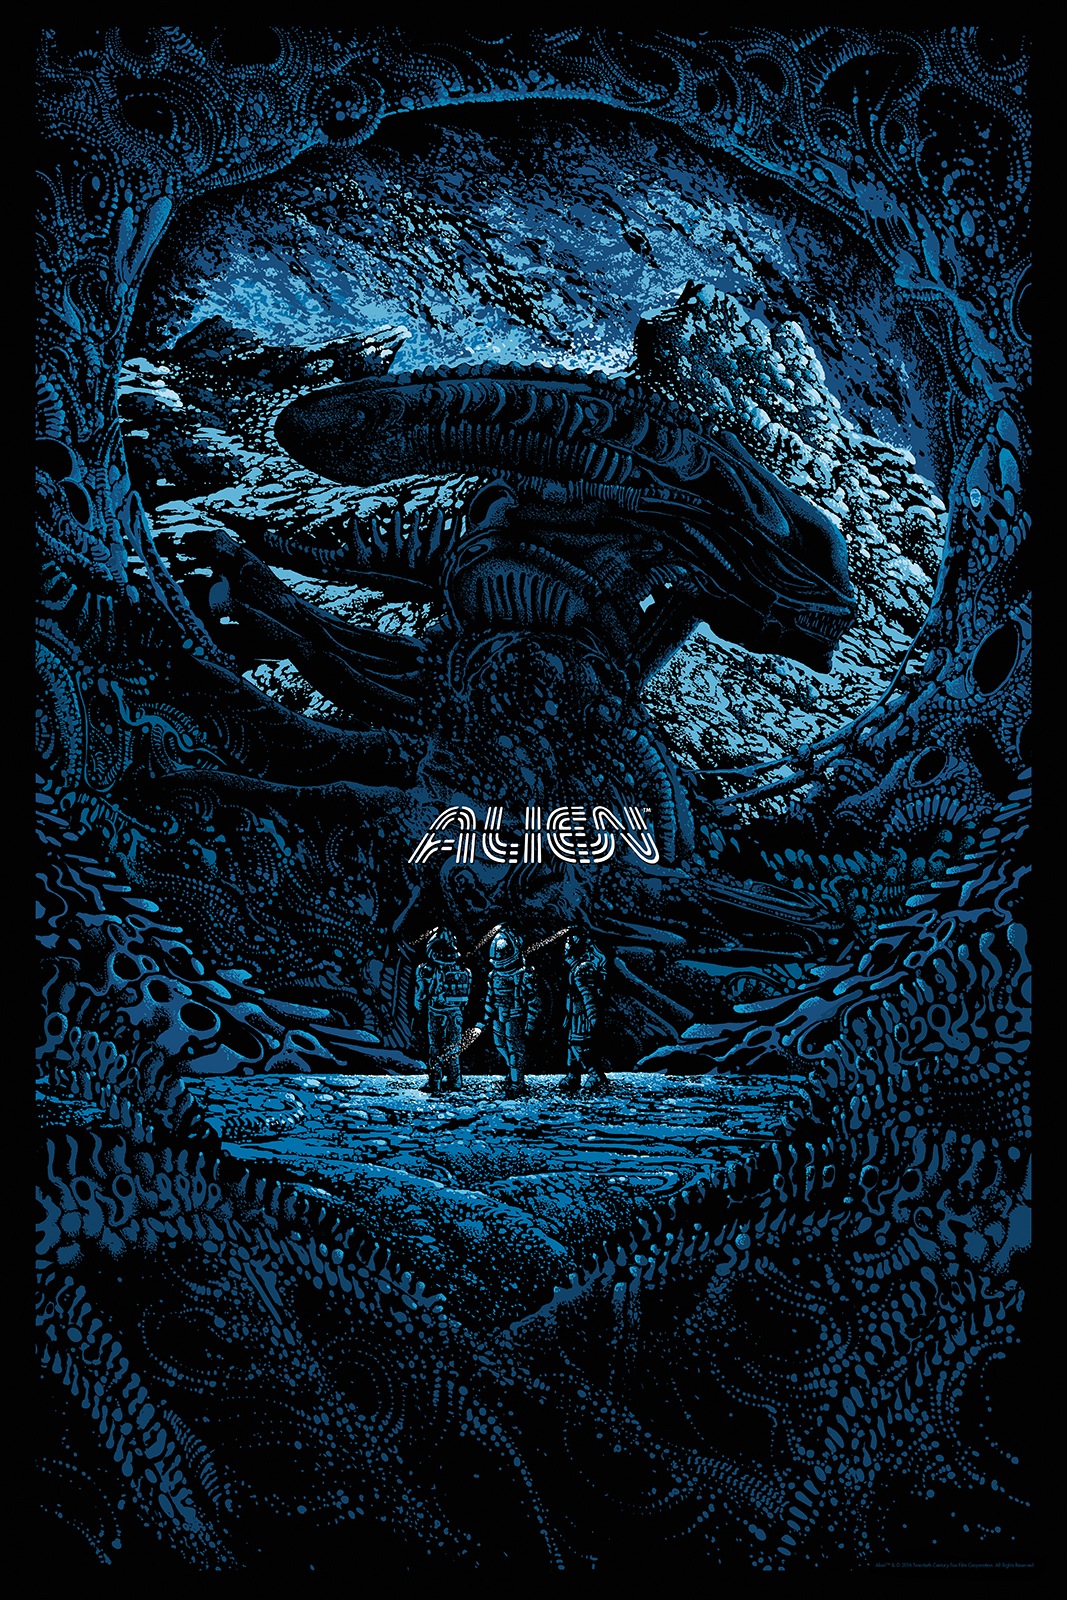 alien-by-kilian-eng-edition-of-300-24×36-screen-print-printed-by-dl-screenprinting-50